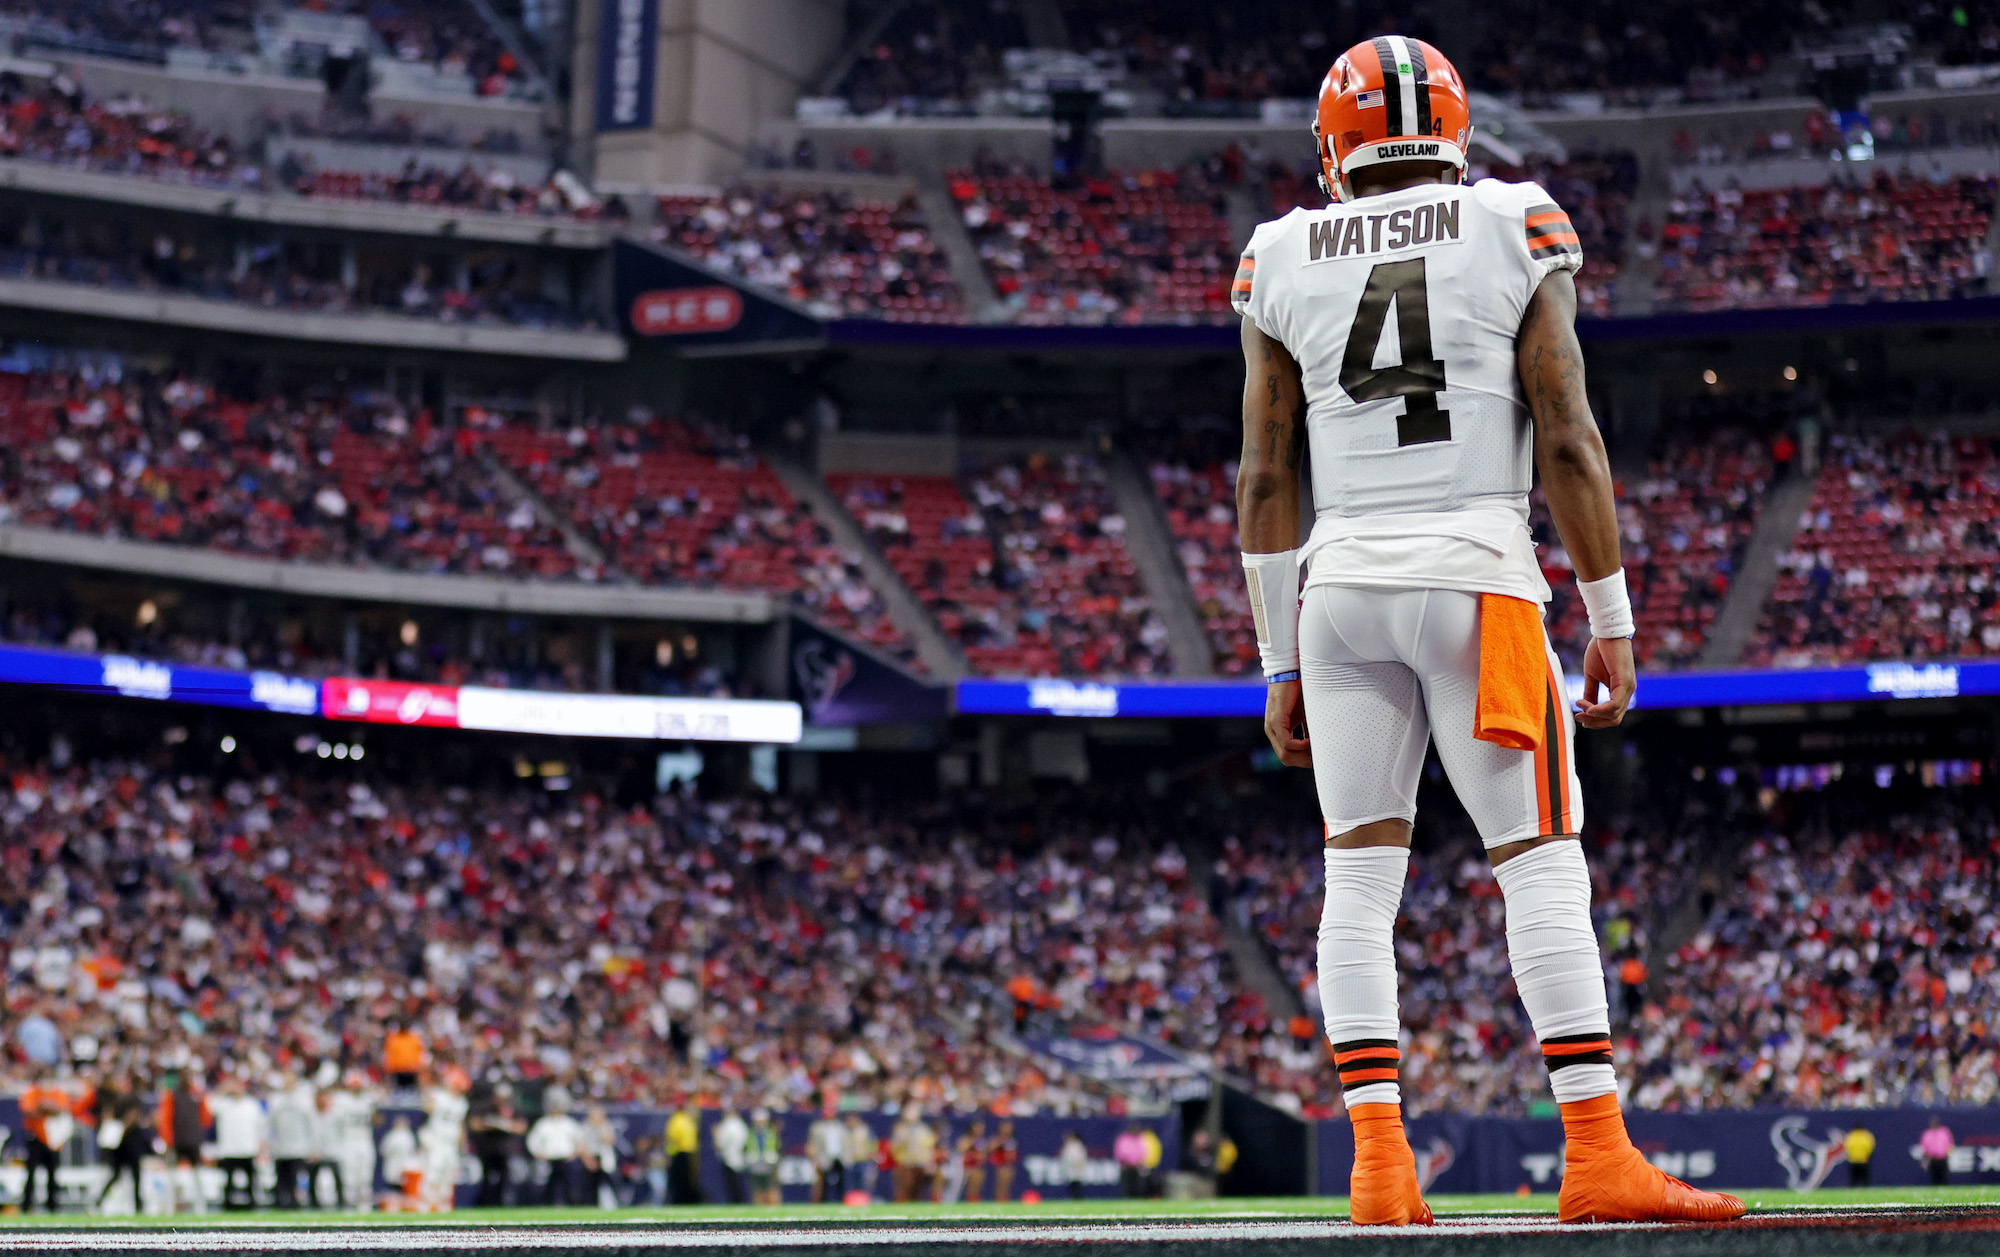 Deshaun Watson #4 of the Cleveland Browns looks onward from the sideline during the second quarter against the Houston Texans at NRG Stadium on December 04, 2022 in Houston, Texas.